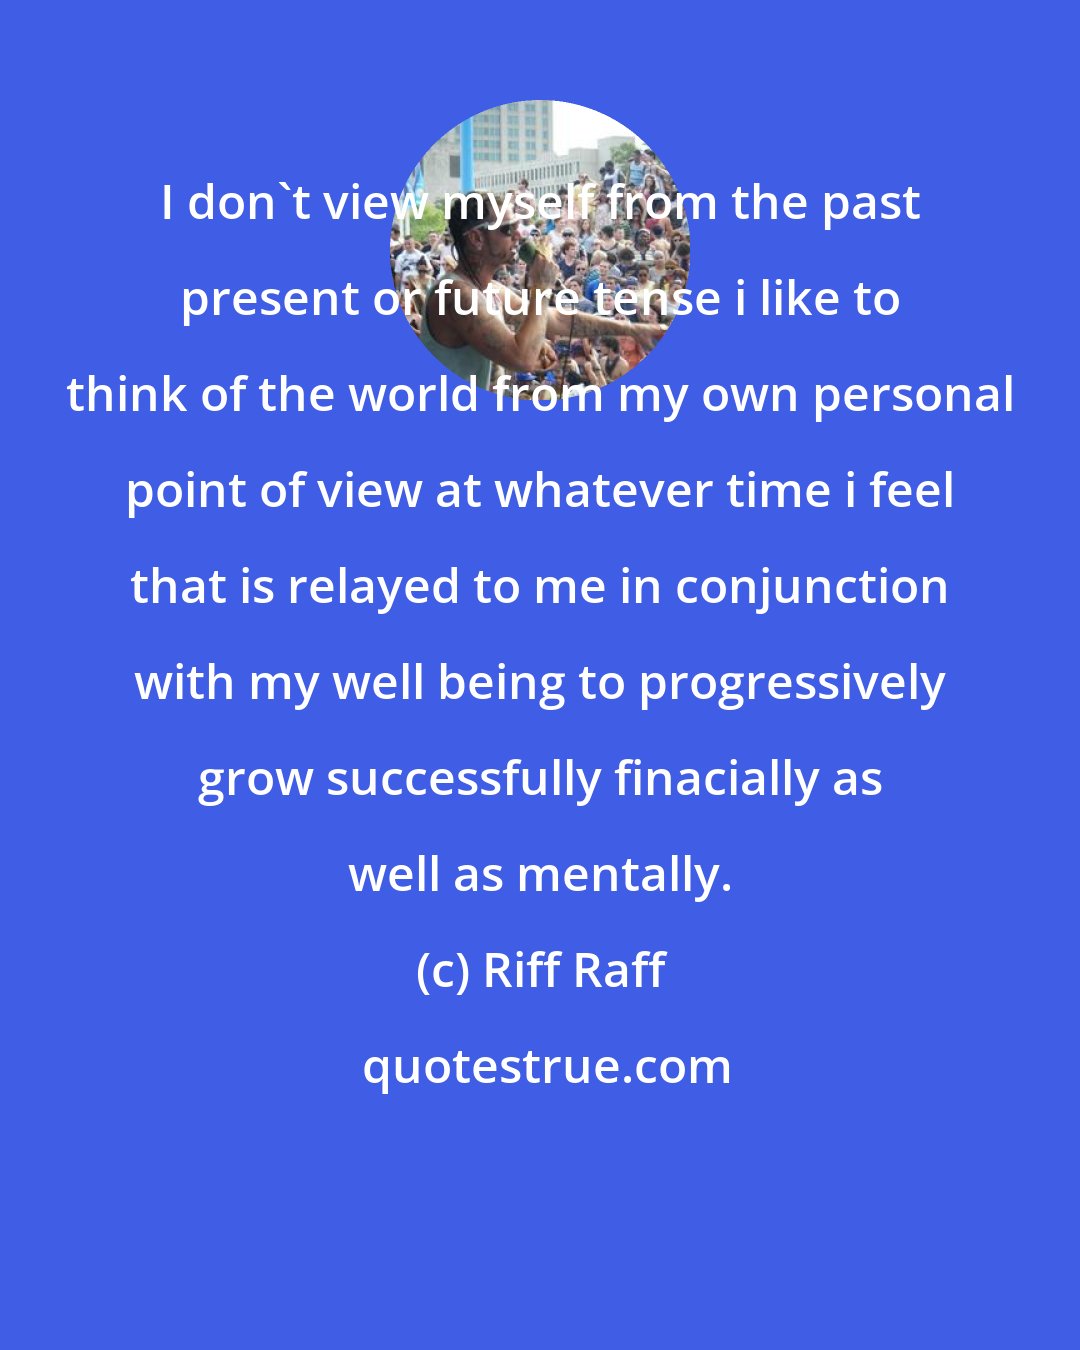 Riff Raff: I don't view myself from the past present or future tense i like to think of the world from my own personal point of view at whatever time i feel that is relayed to me in conjunction with my well being to progressively grow successfully finacially as well as mentally.